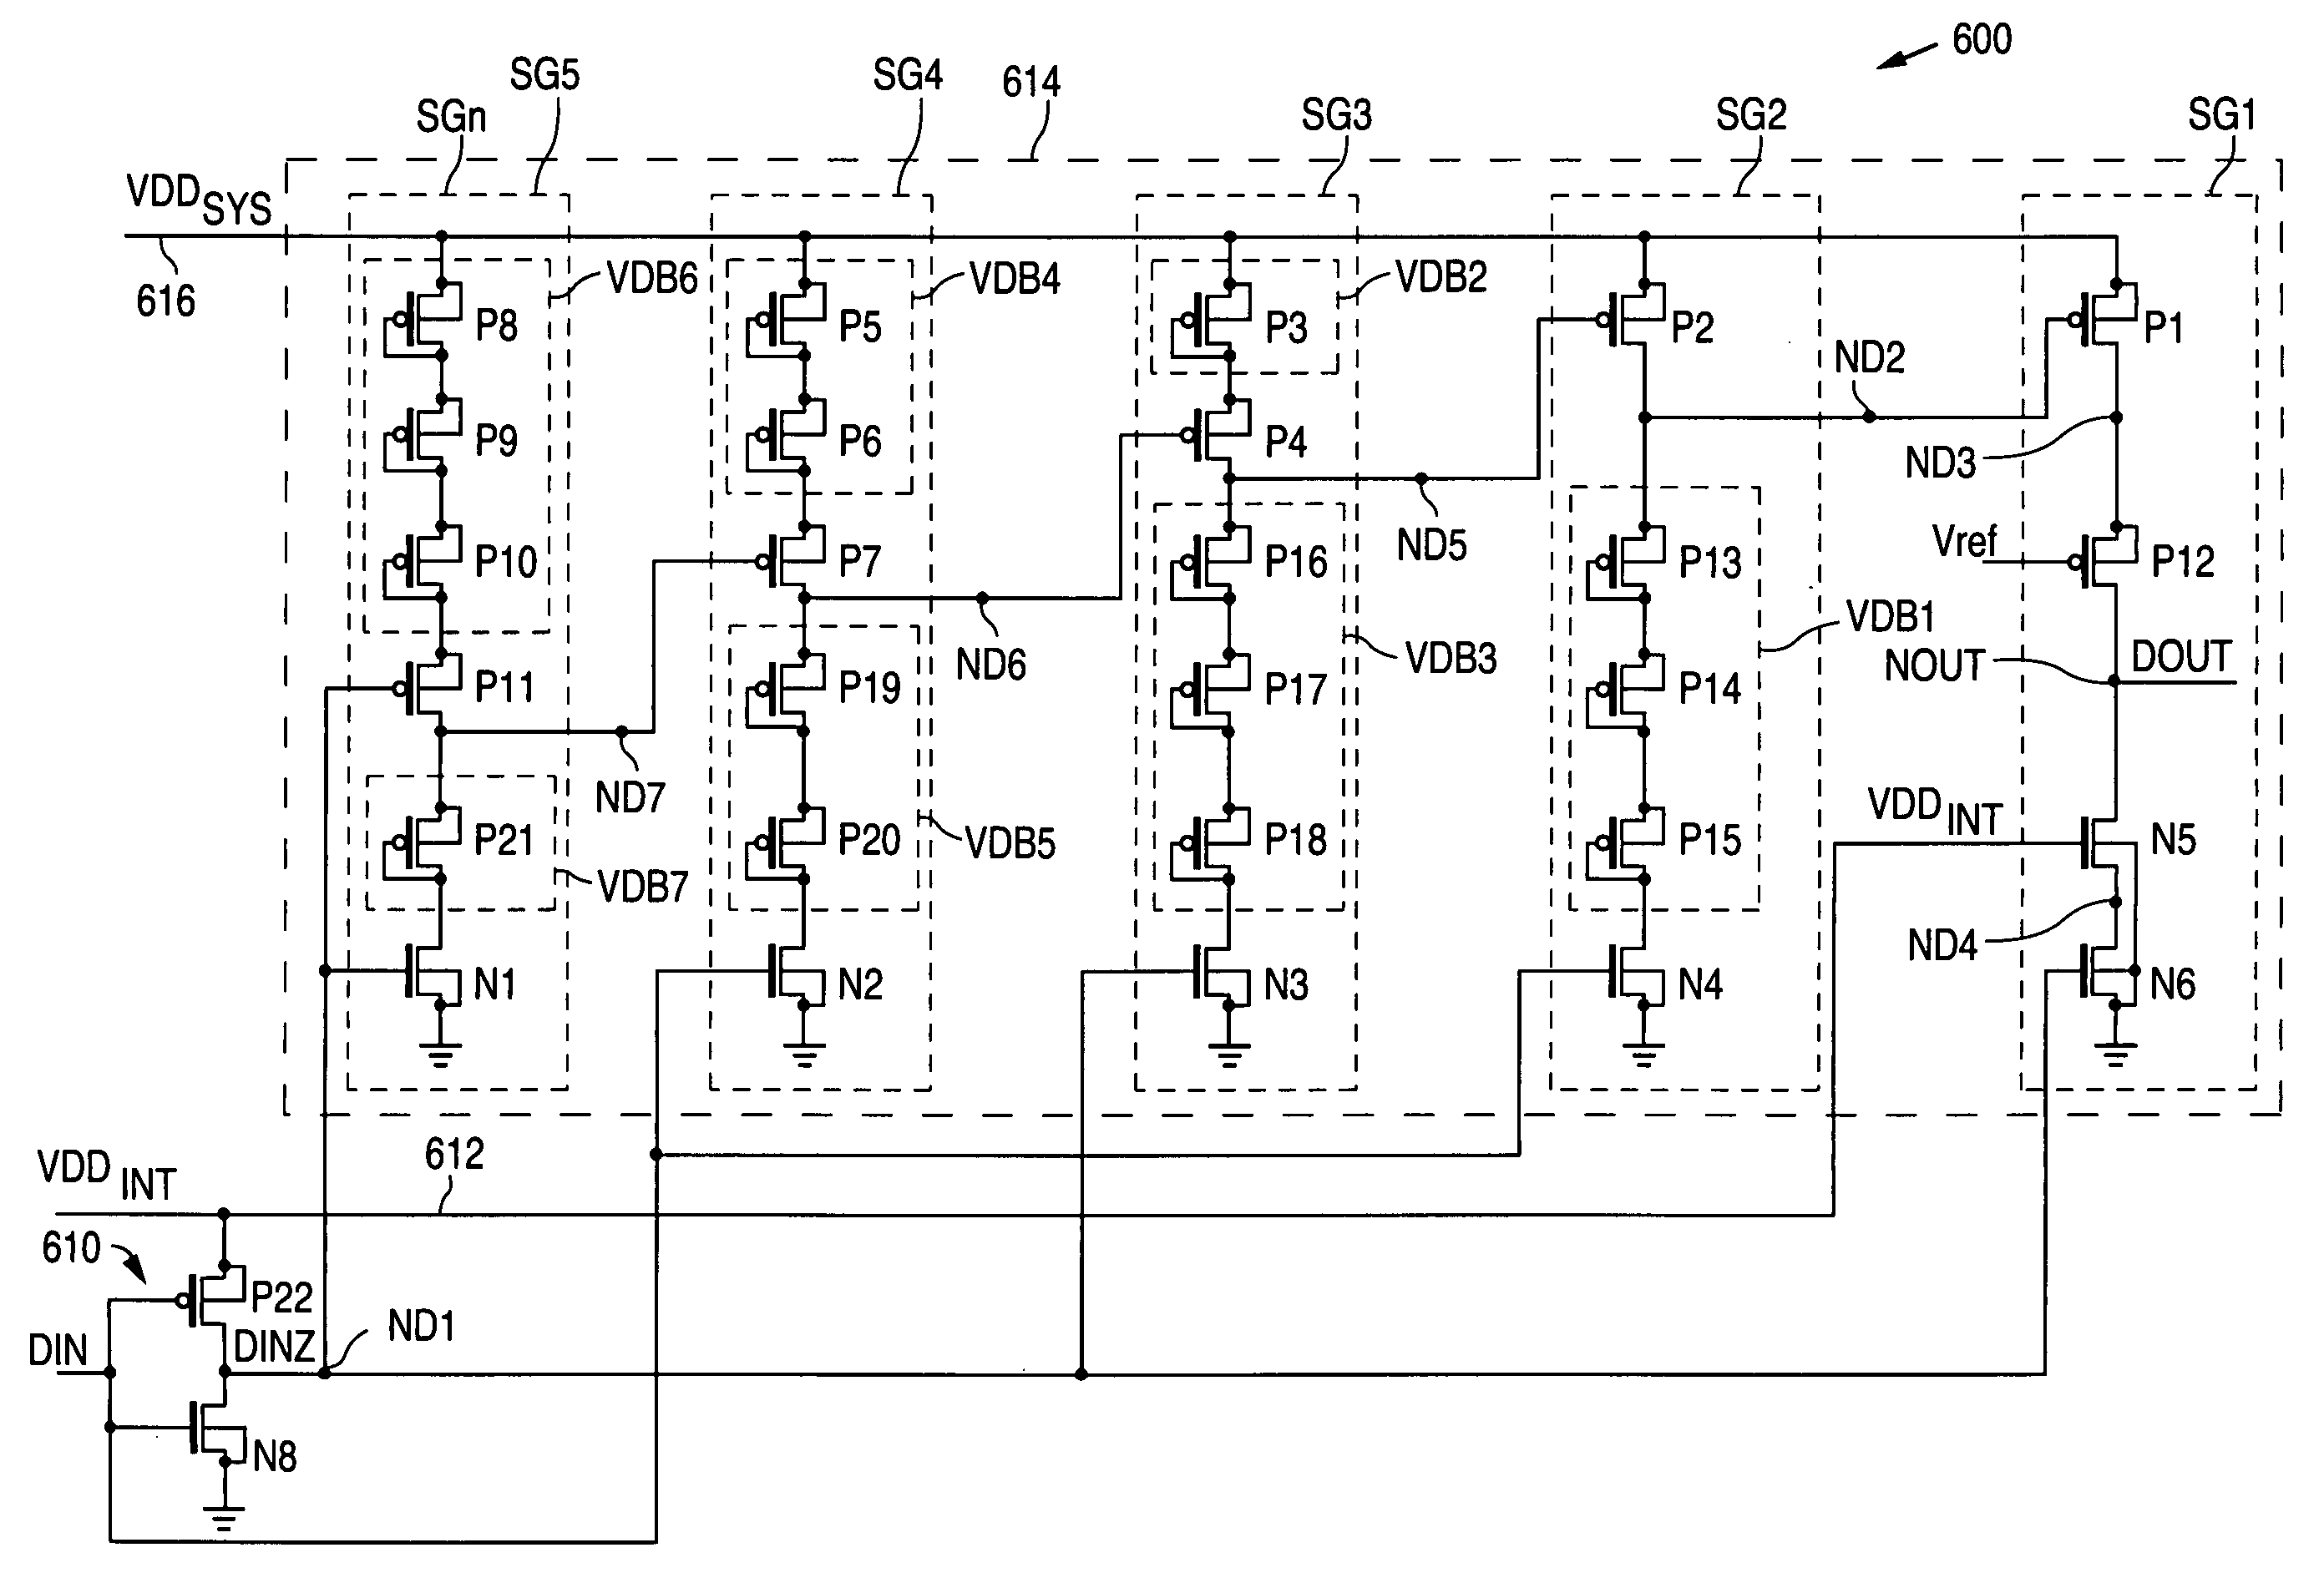 High voltage CMOS output buffer constructed from low voltage CMOS transistors